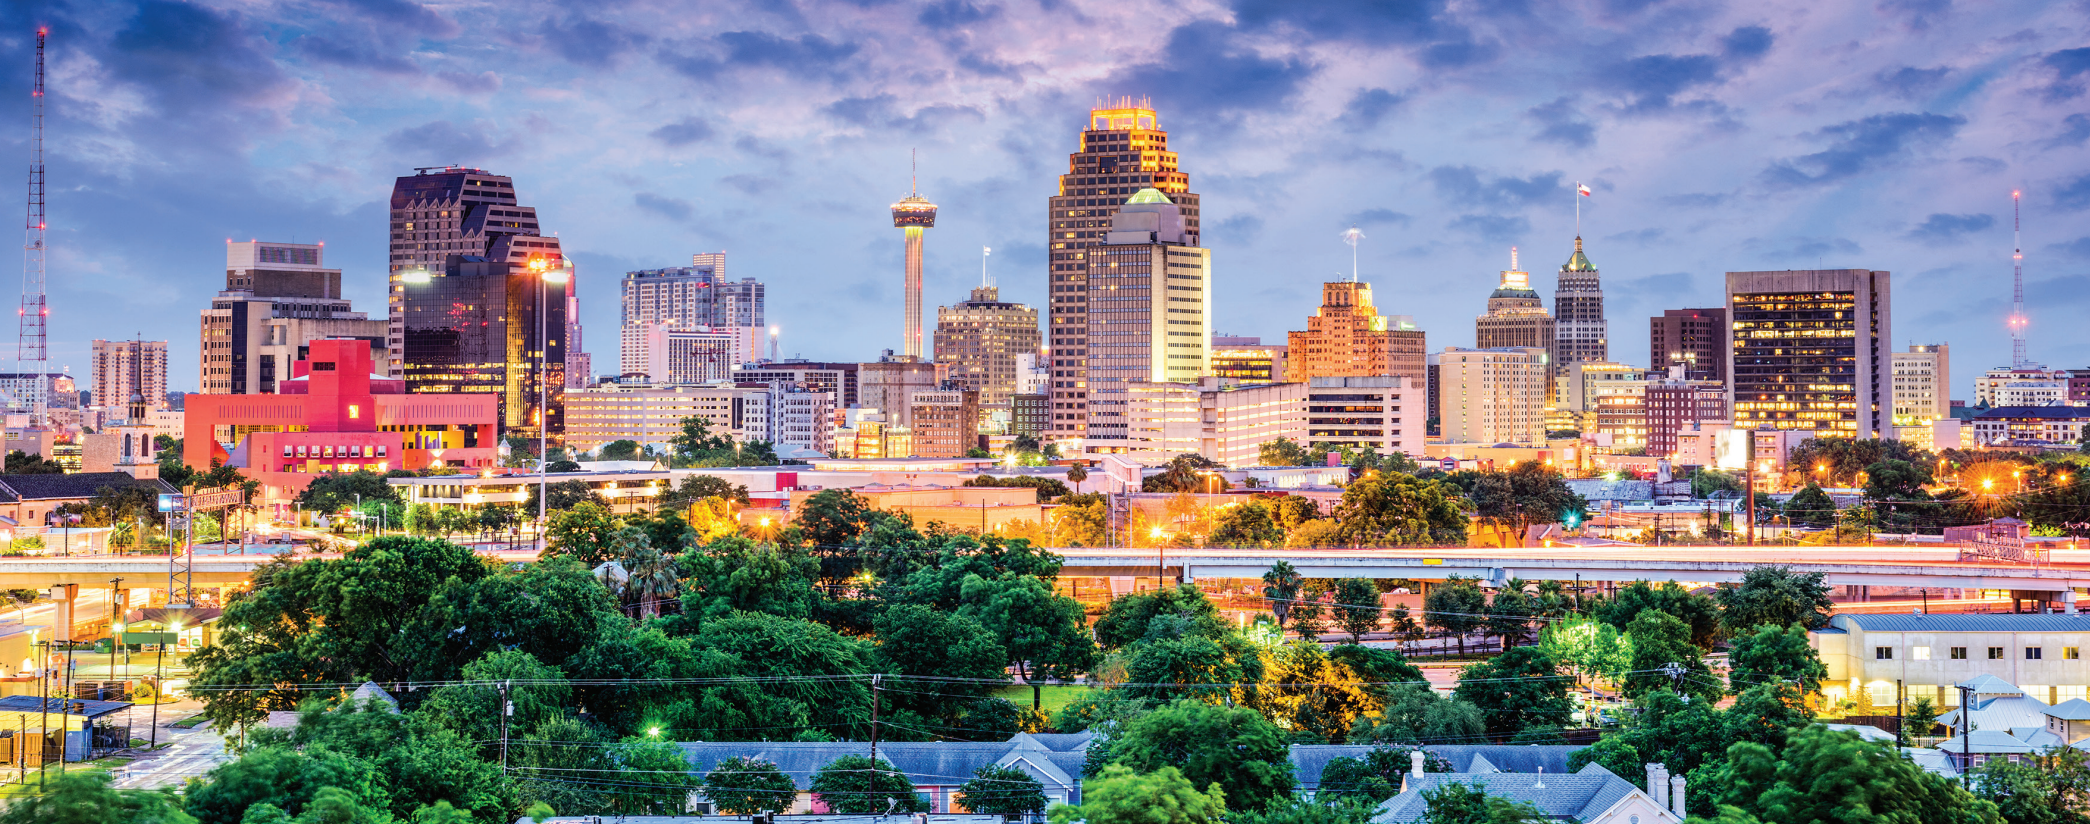 The American Society of Retina Specialists (ASRS) will host its 39th Annual Scientific Meeting from October 8-12, 2021, at the JW Marriott San Antonio Hill Country Resort and Spa in San Antonio, Texas. 